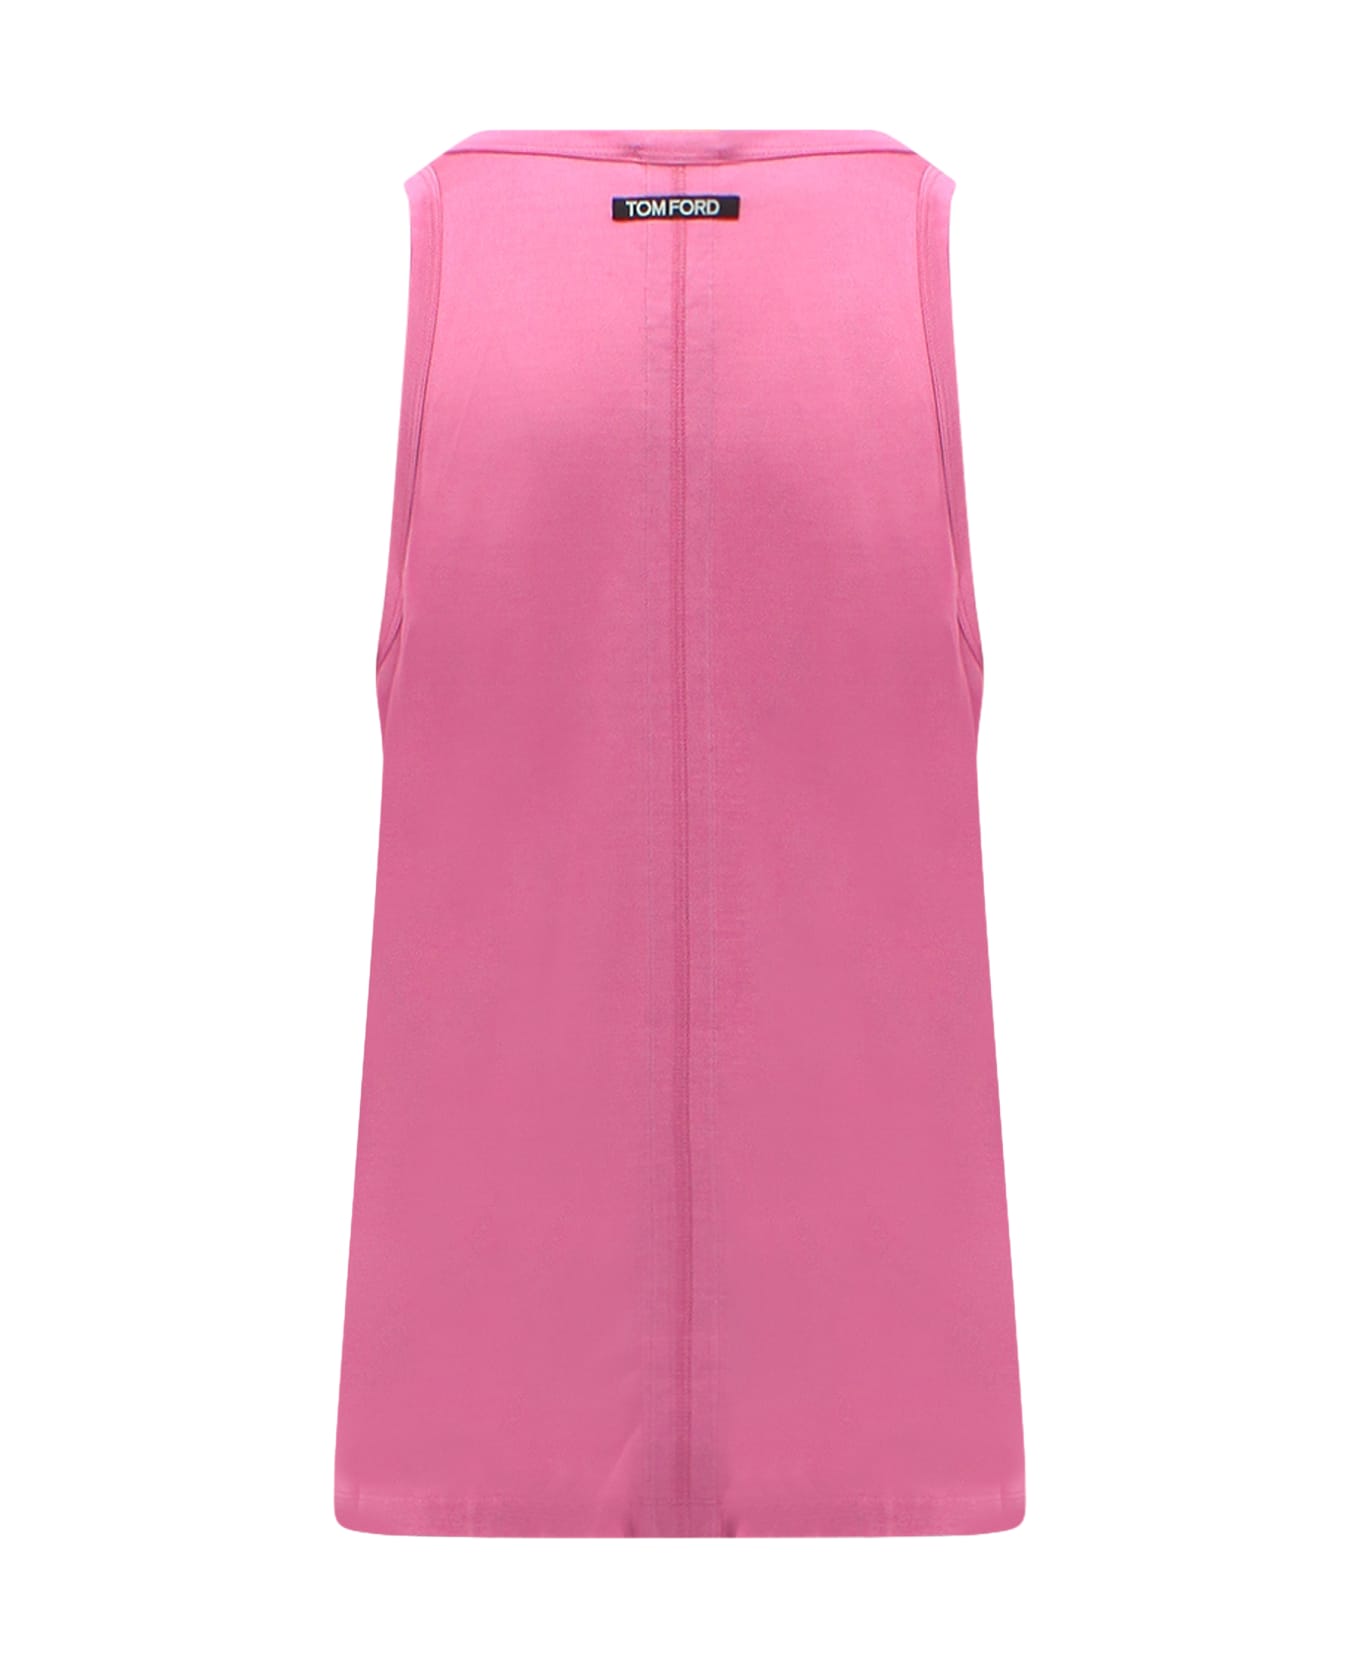 Tom Ford Tank Top - Pink